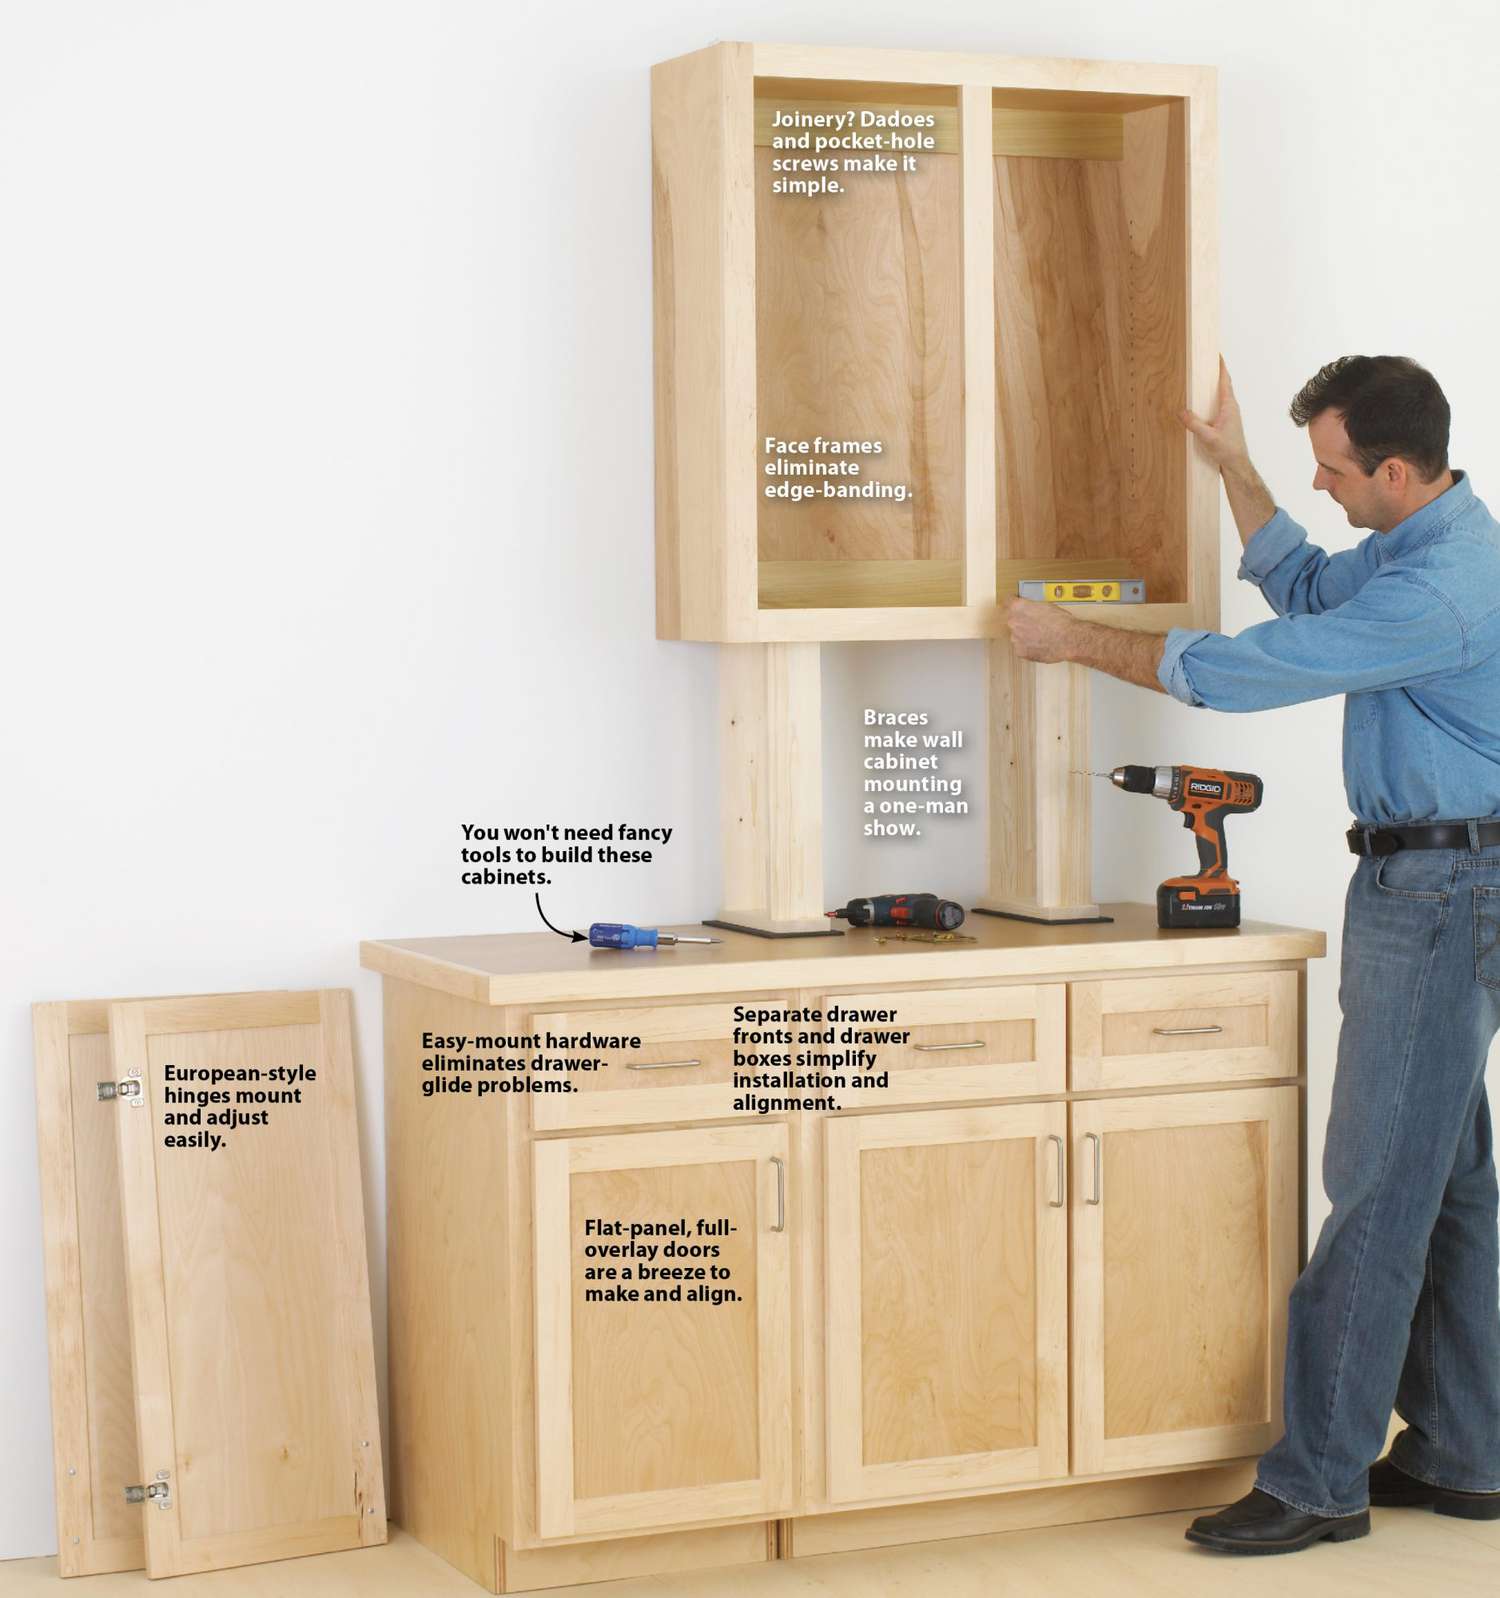 How To Paint Mdf Board Cabinets Furniture: Simple Steps!